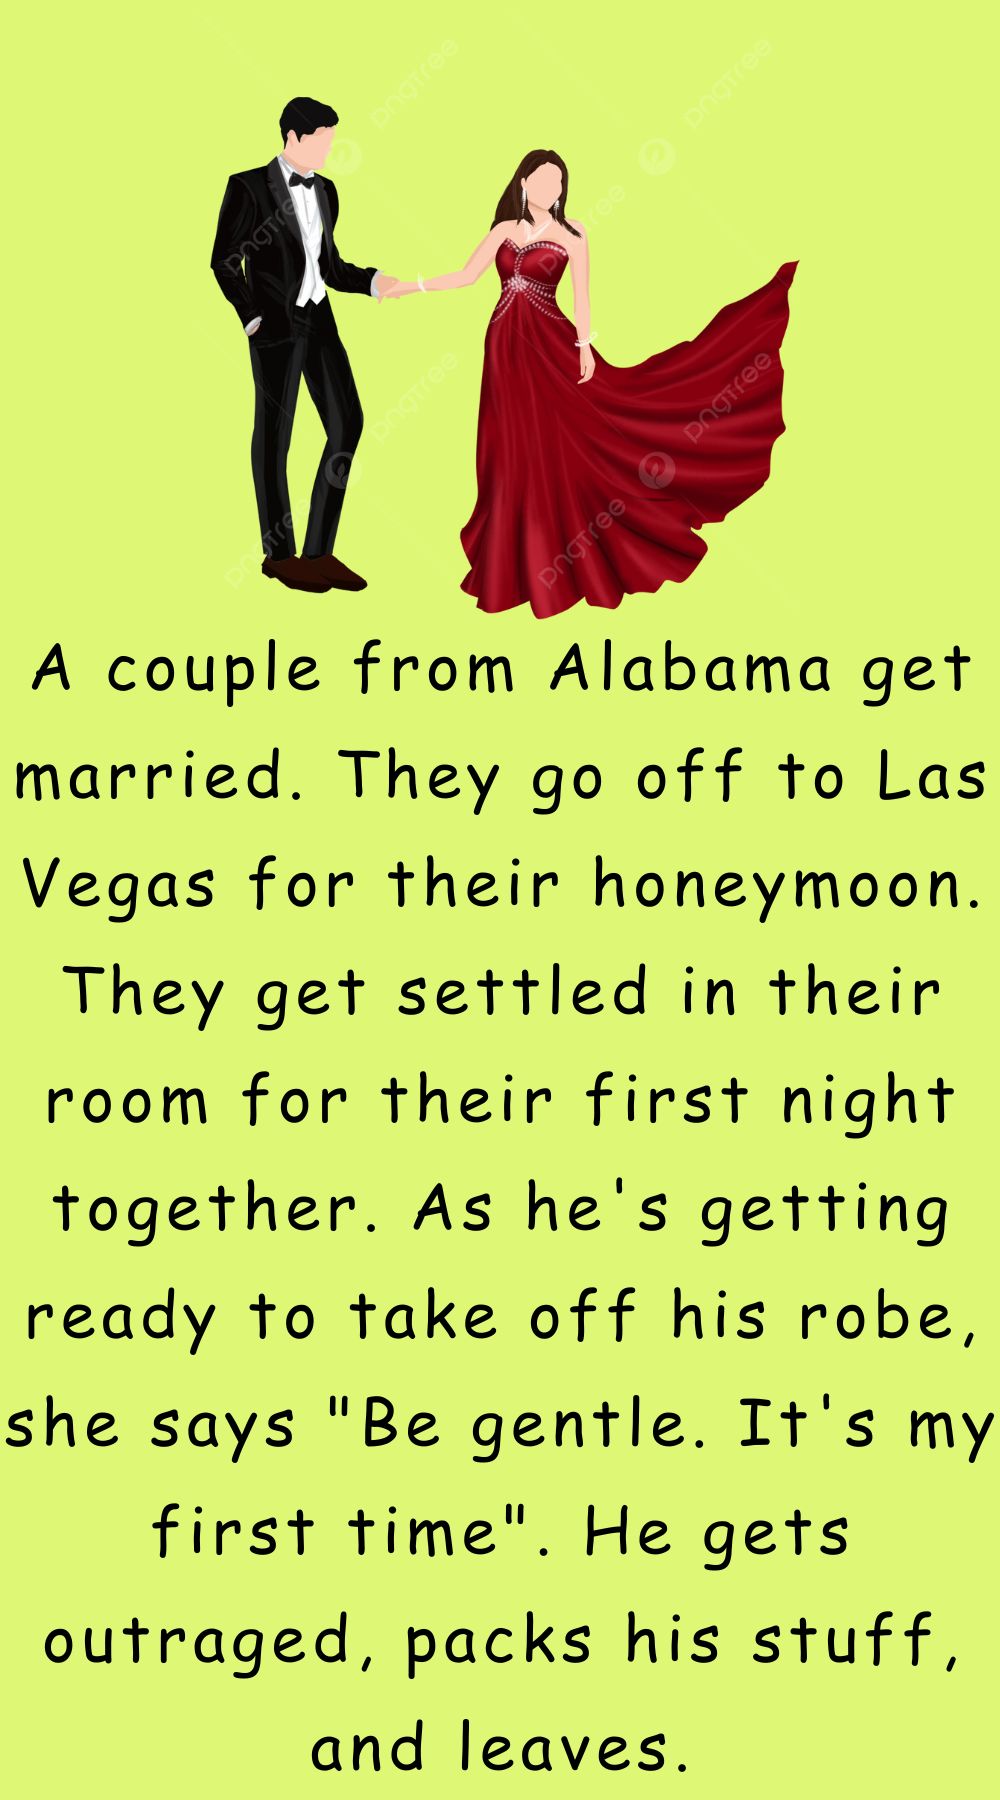 A couple from Alabama get married